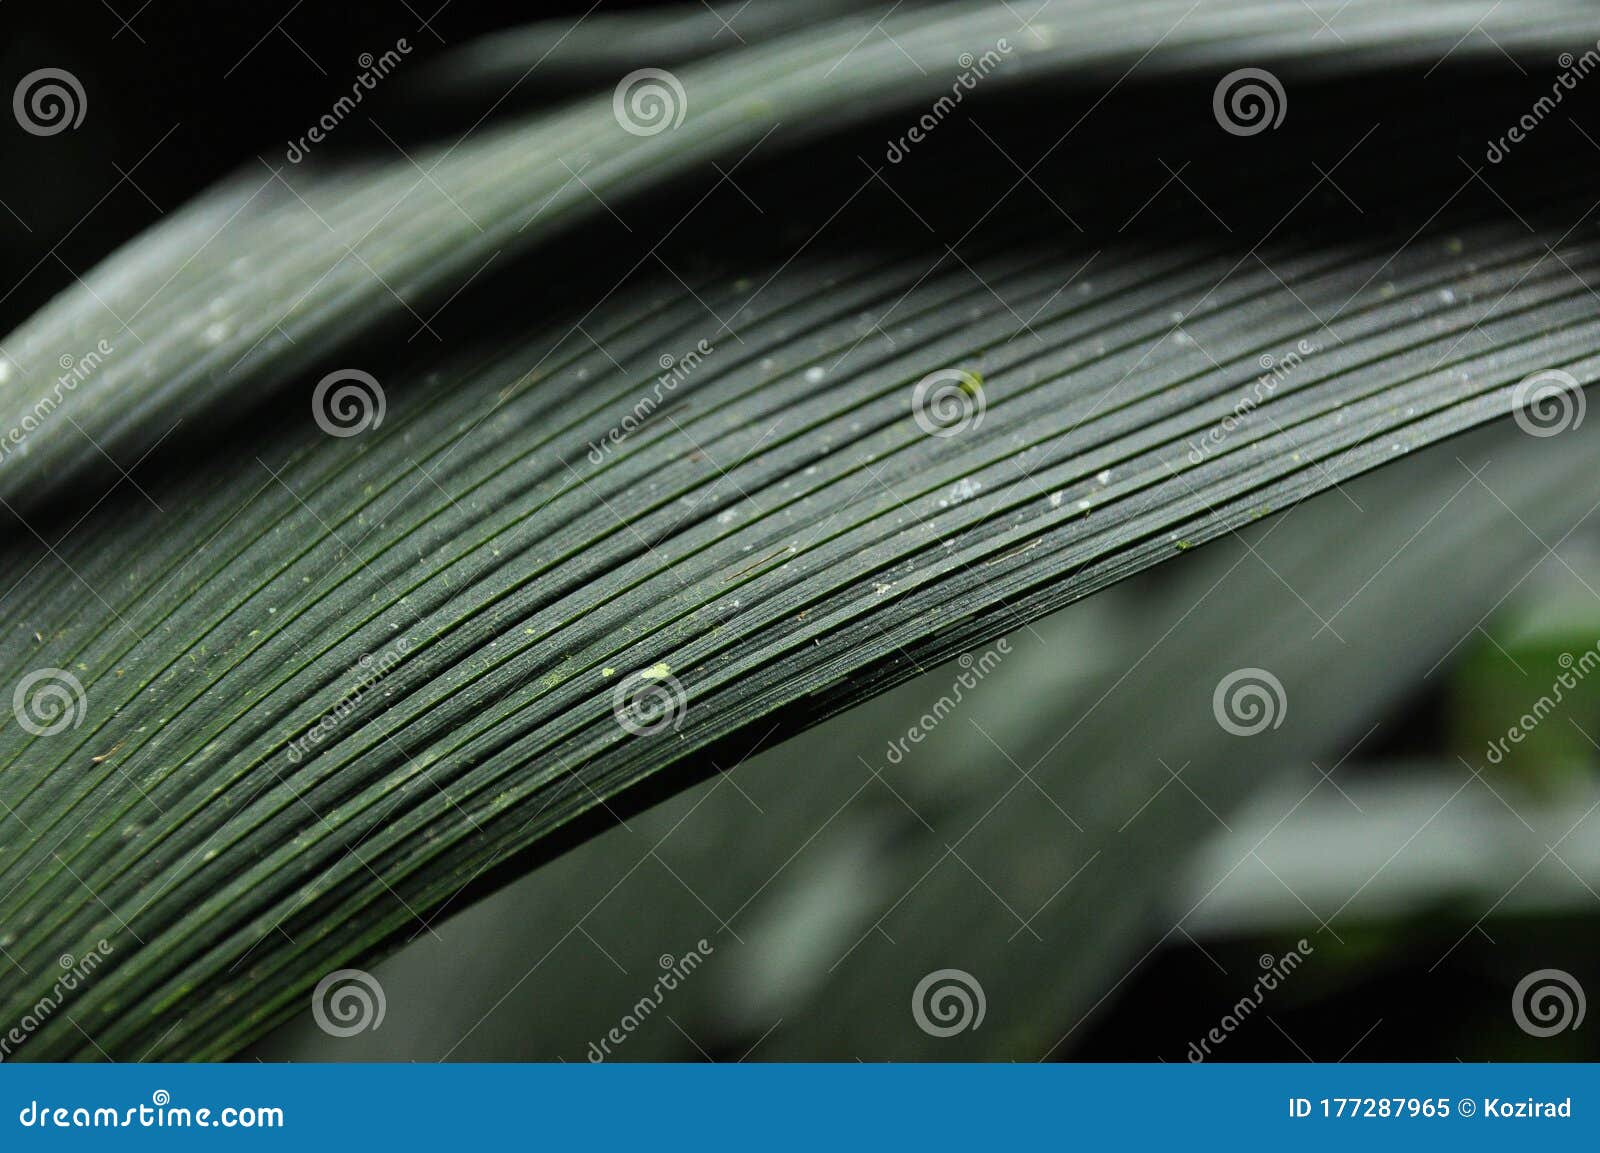 leaves of tropical plants growing in the jungle. details of the innervation of the leaf blade. nerves and connections of green